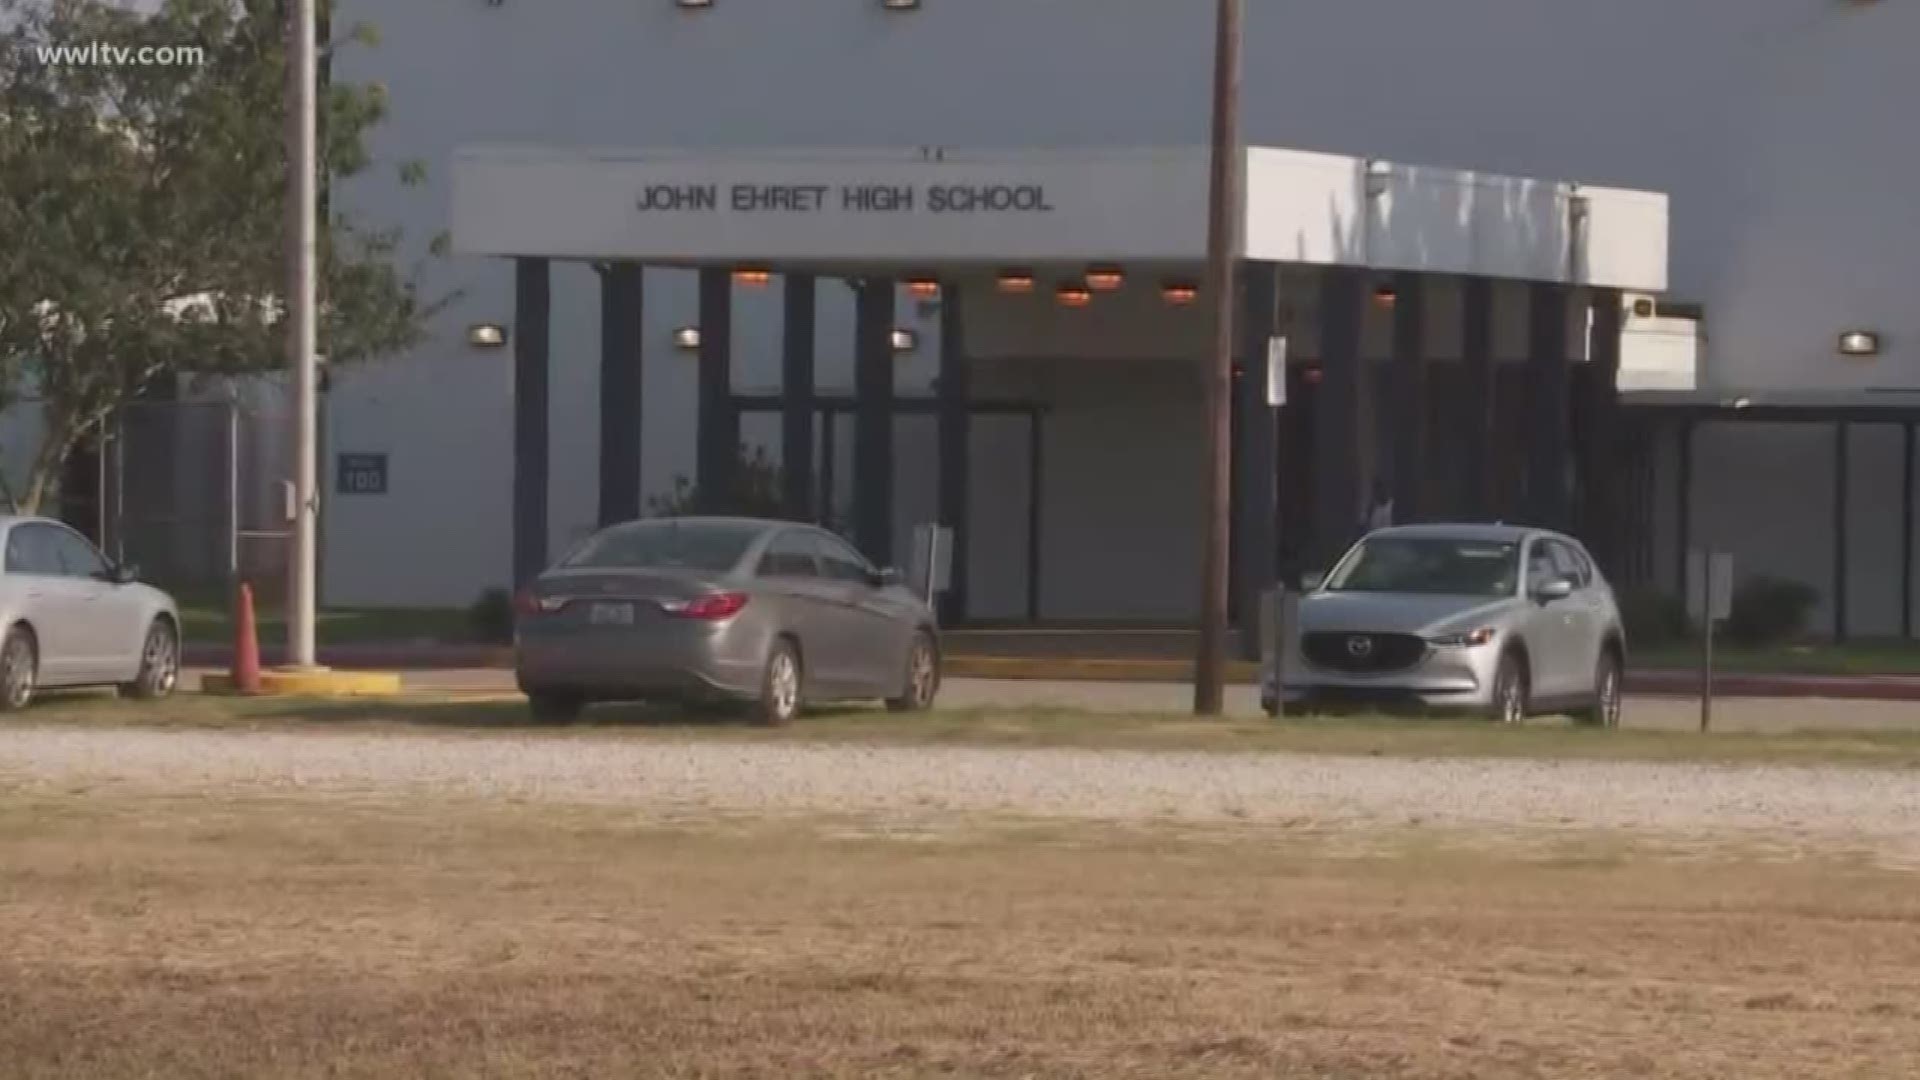 There have been more than a dozen fights at the Marrero high school since the start of the academic year